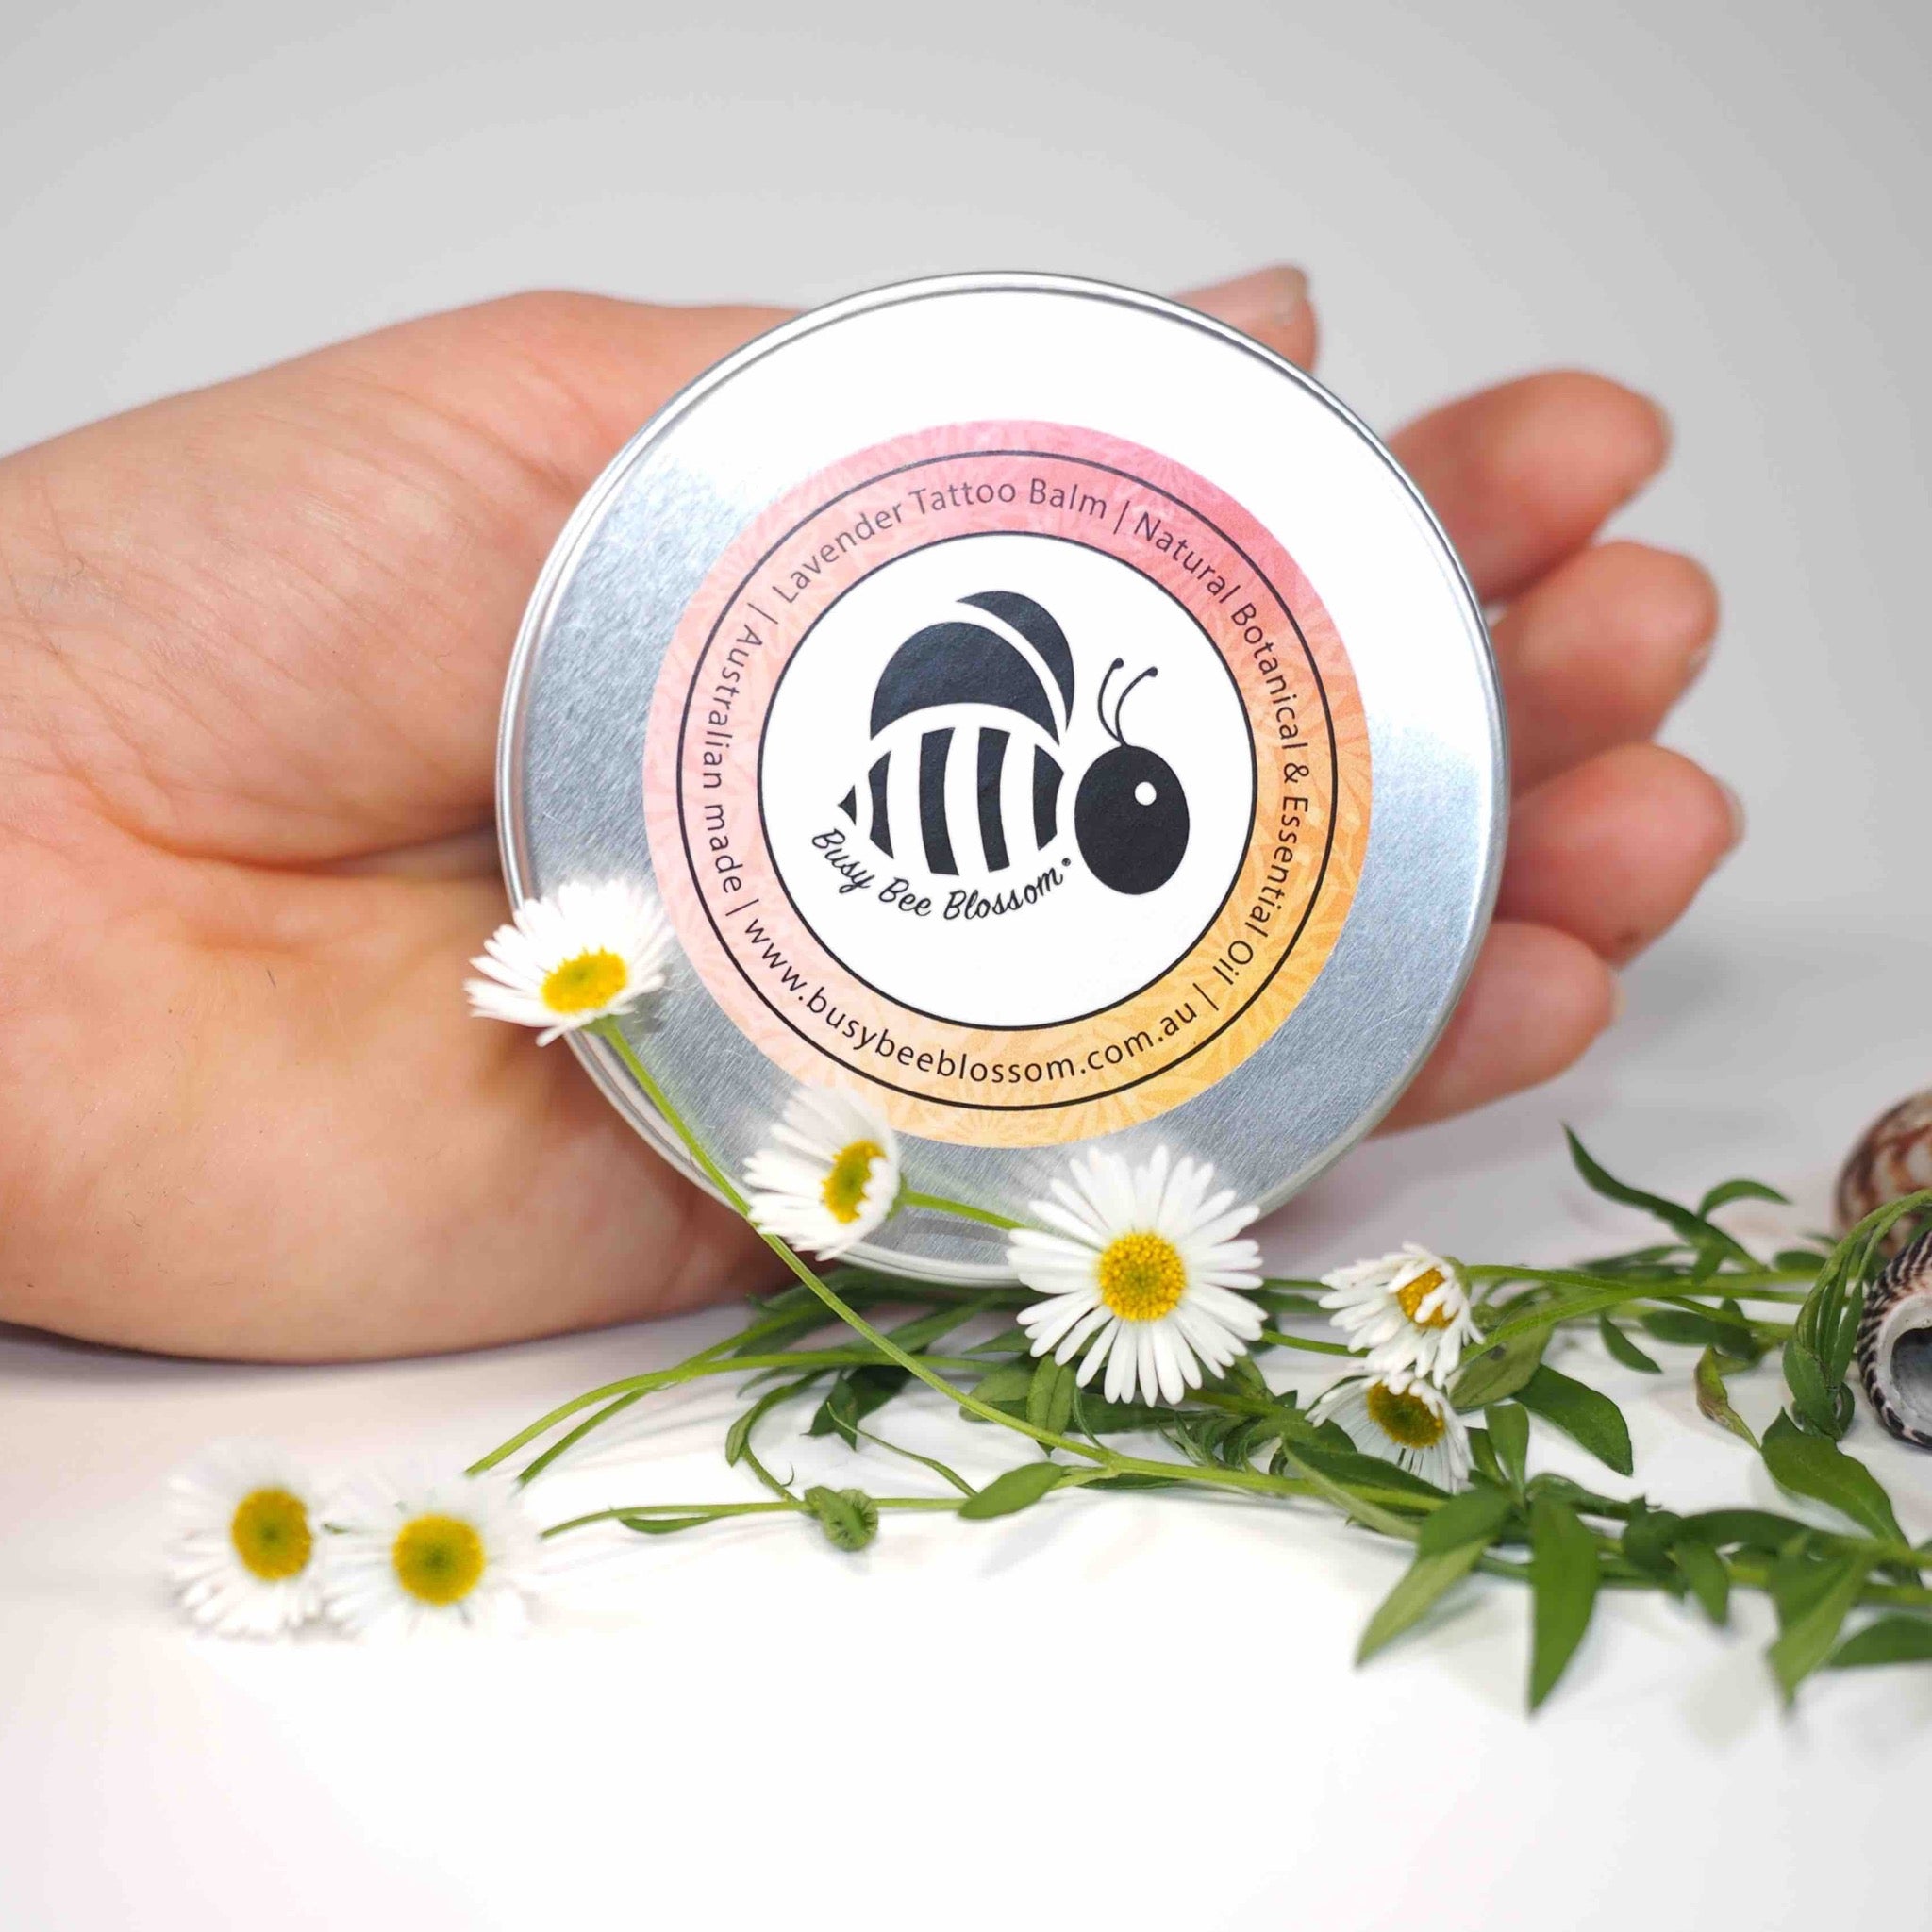 Tattoo Balm Enhanced Color Moisturization and Hydration Tattoo Cream Aftercare  Tattoo Brightening Healing Tattoo Care Non-Scented Organic Ingredients  Tattoo Moisturizer